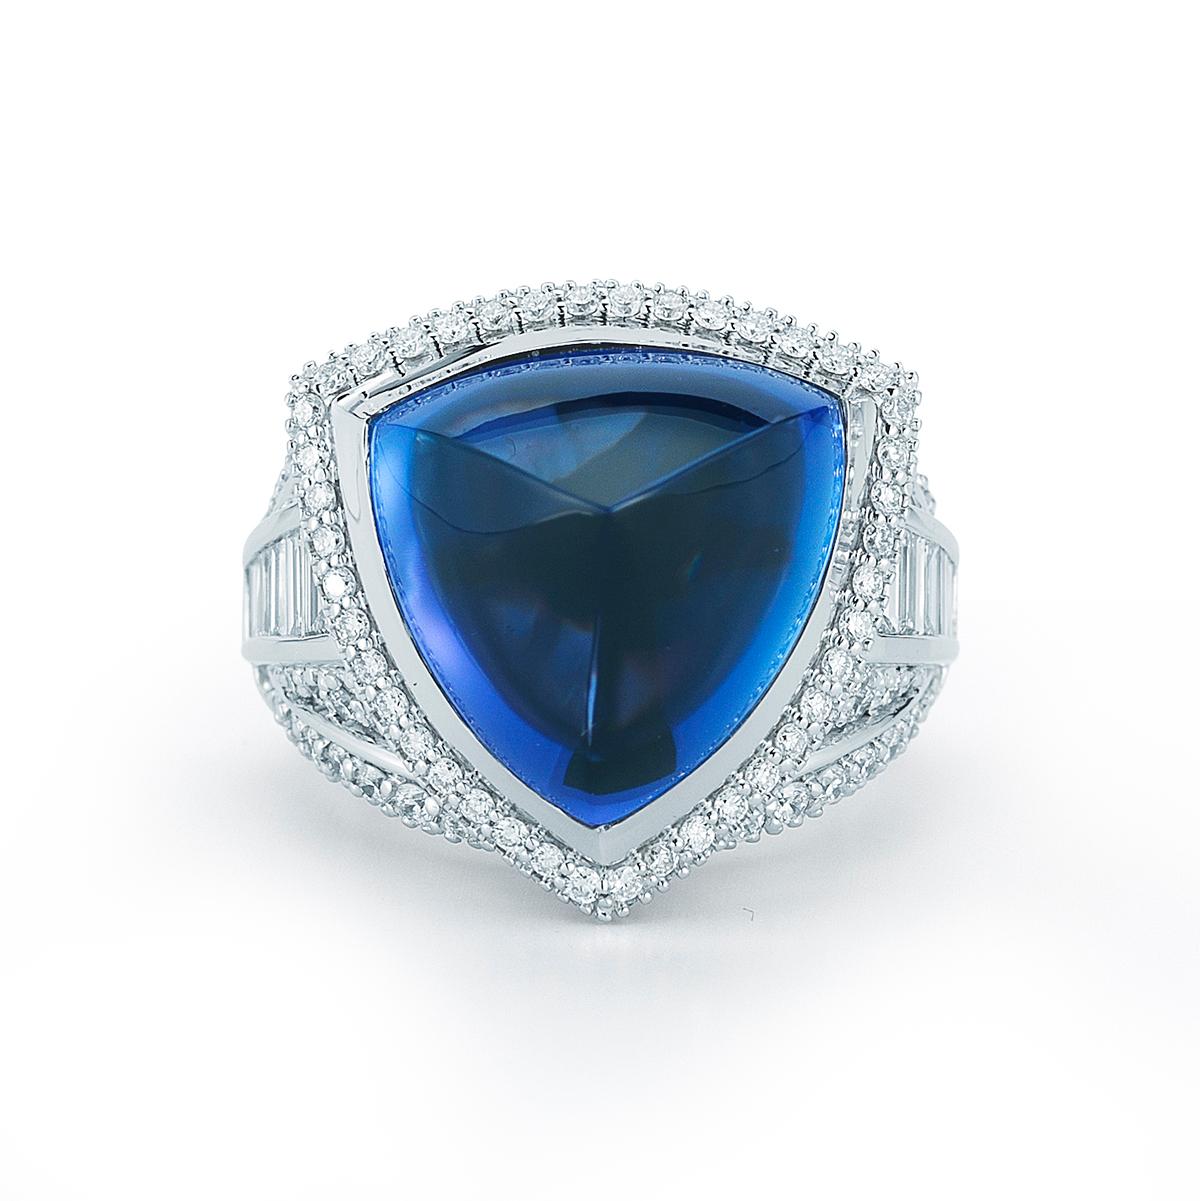 TANZANITE TRILLION CABOCHON RING BY RAYAZTAKAT
A marvelous Tanzanite trillion ring with diamond baguette accents.
Item:	# 01650
Setting:	18K W
Color Weight:	19.27 ct. of Tanzanite
Diamond Weight:	3.14 ct. of Diamonds